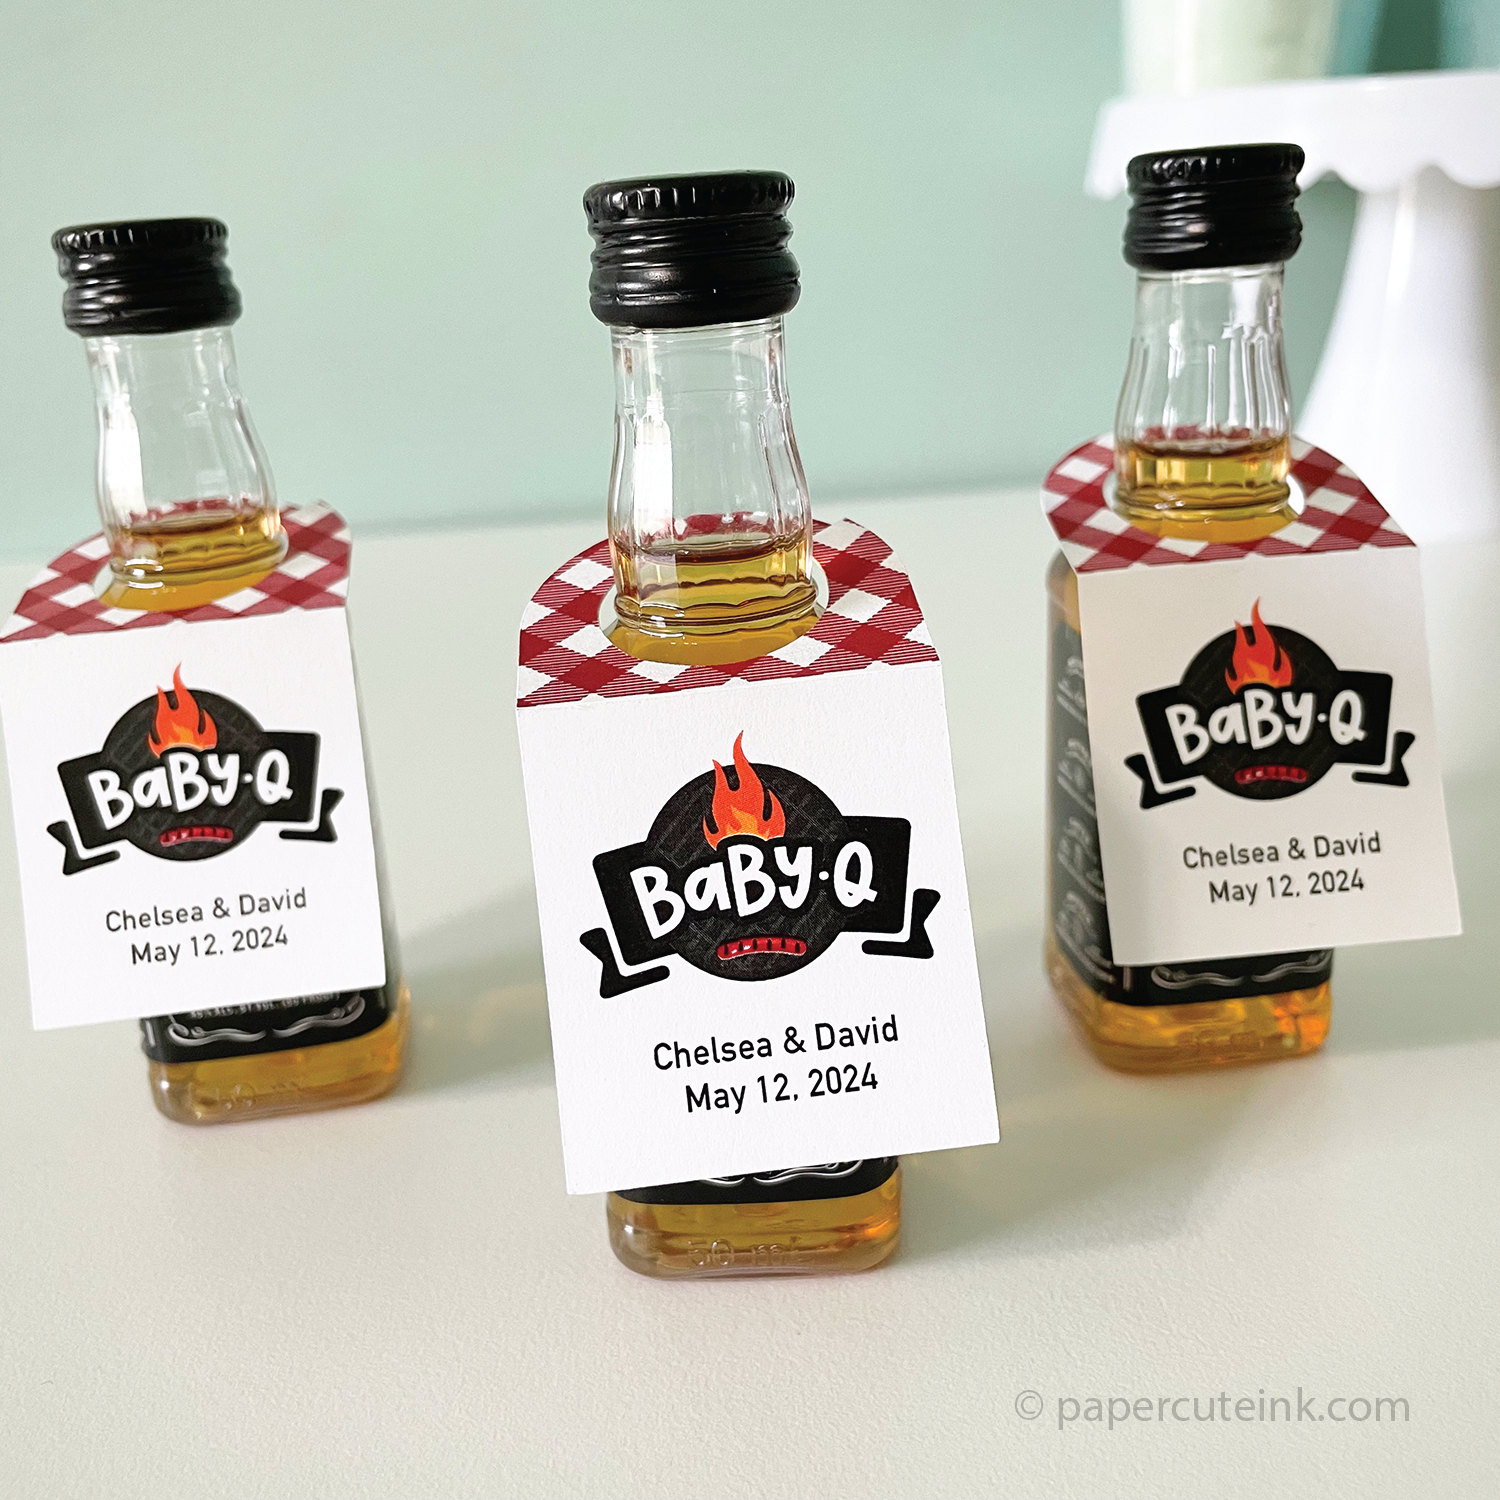 Barbecue baby shower bbq babyq favor tags for mini liquor bottles feature a red gingham pattern and barbecue grill and flame